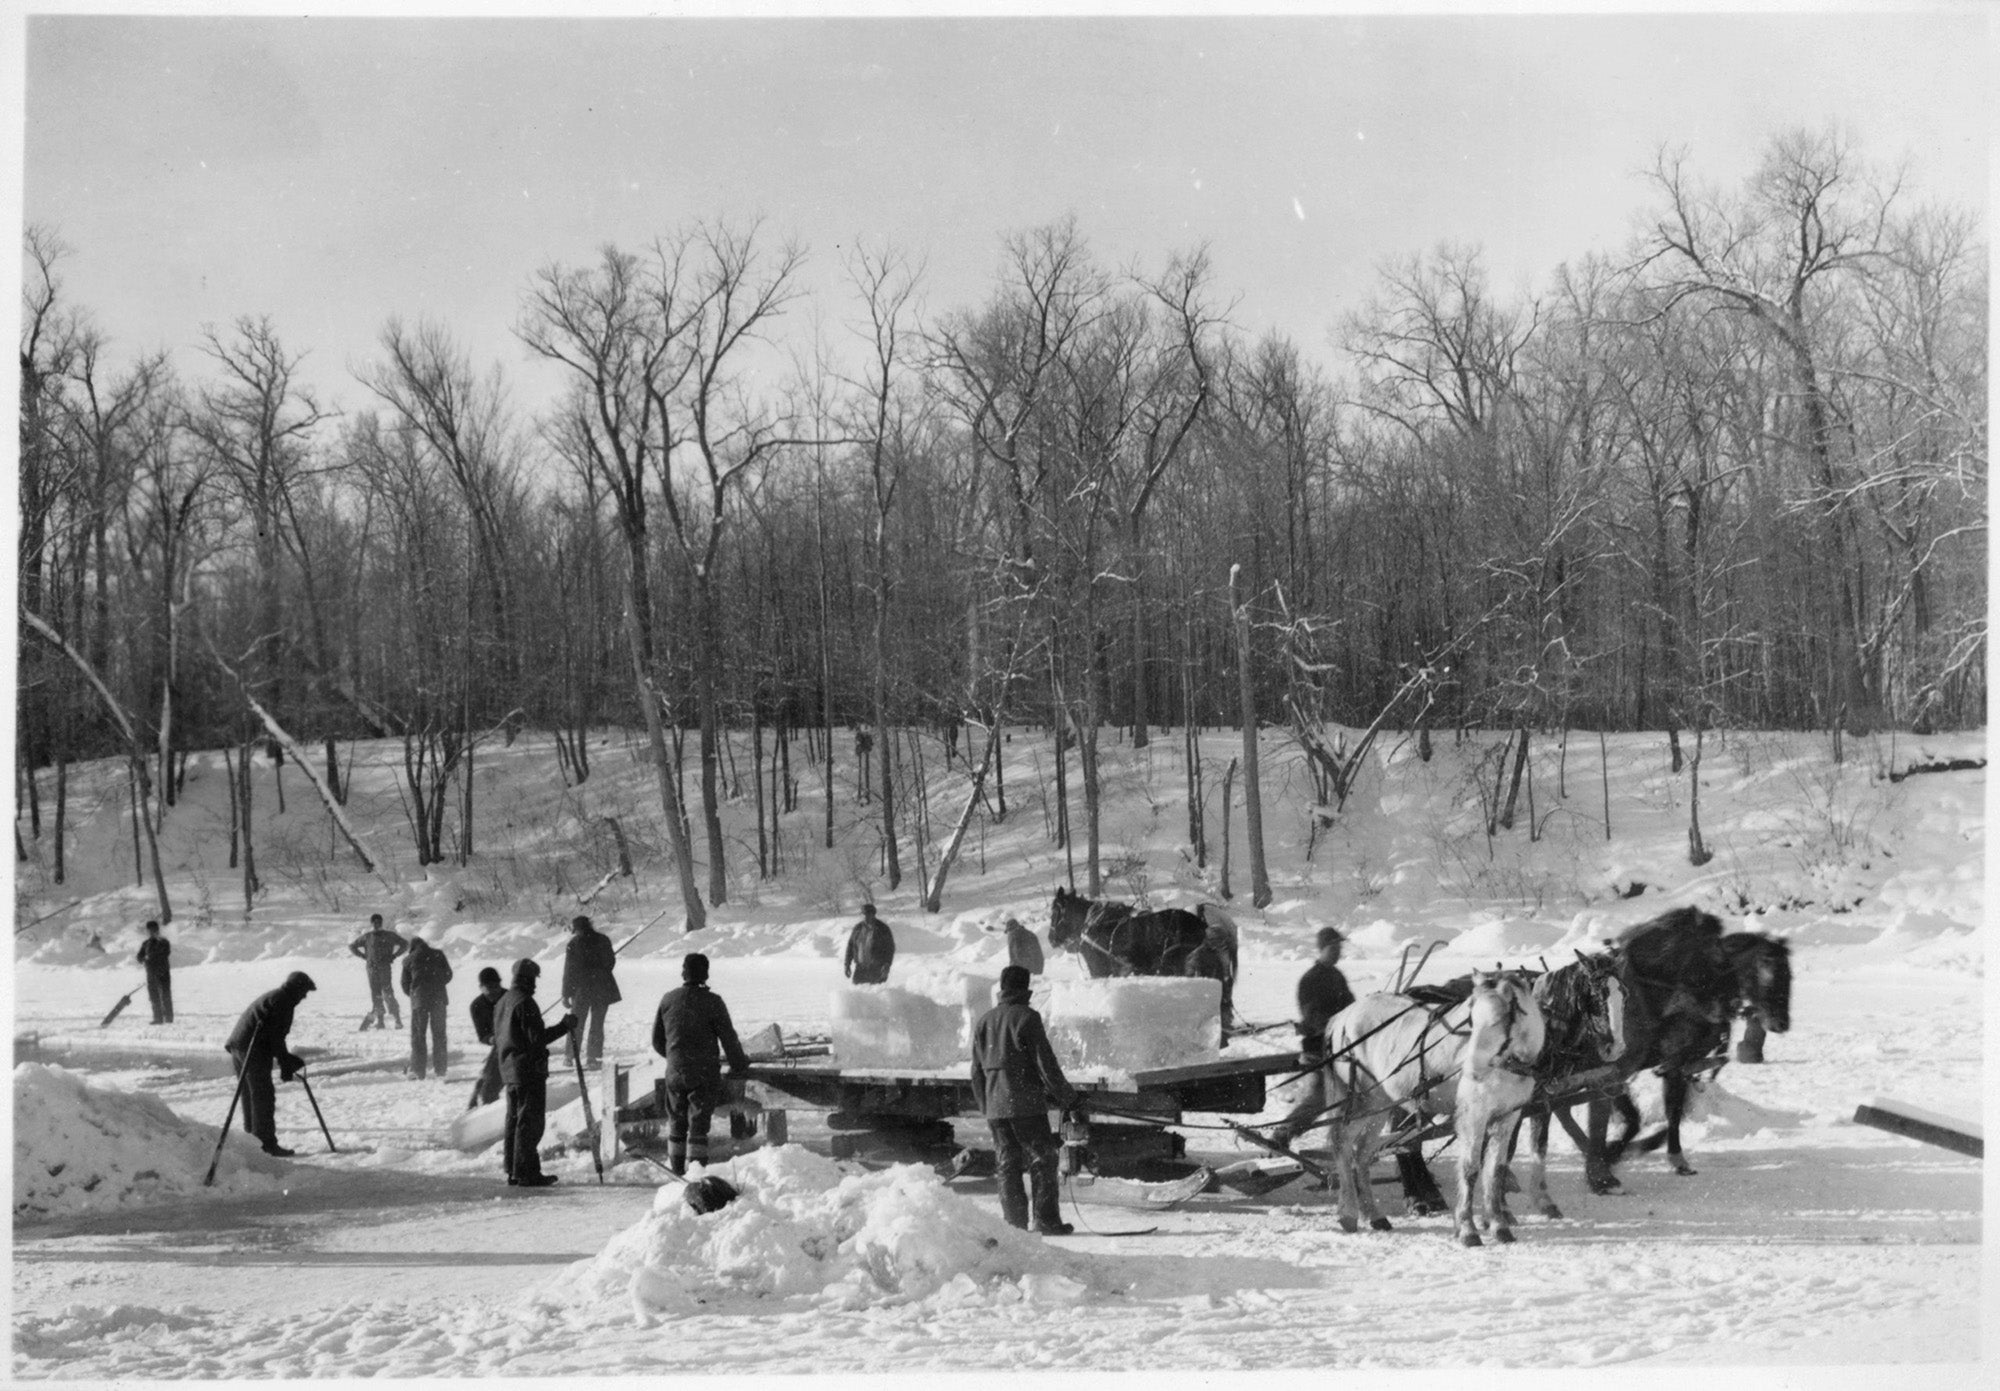 Ice blocks are cut and loaded onto a horse drawn sled, c. 1935